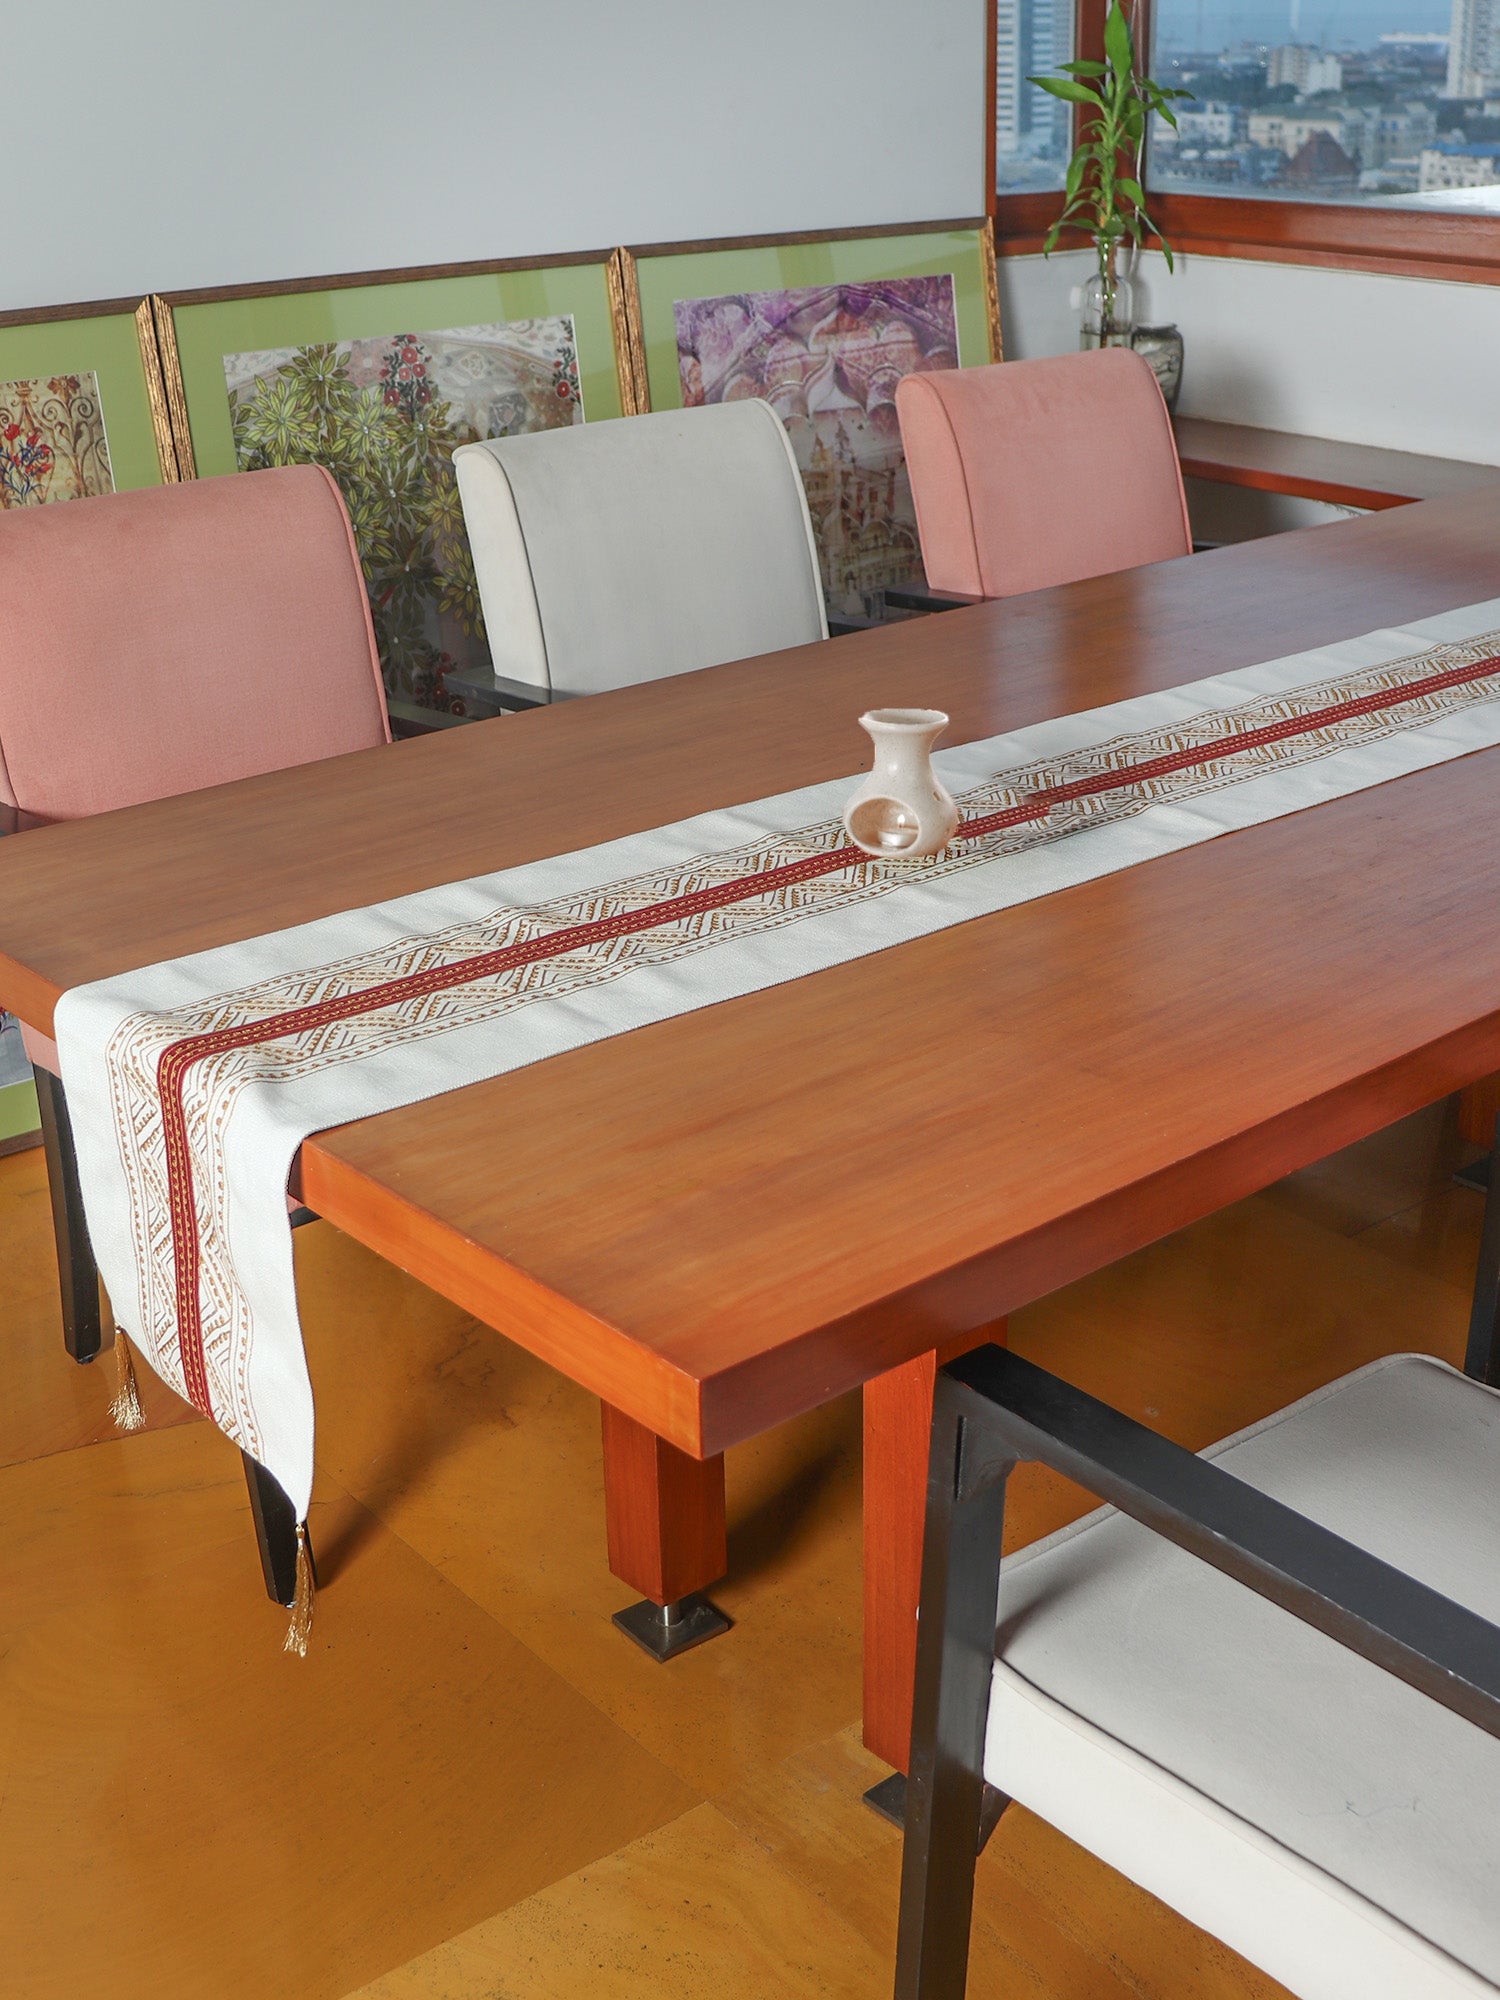 Table Runner with Embroidery and Patchwork in Center and Tassels | Cotton Blend - Beige | 4 Seater/6 Seater Table Cloth, Runner for Dining Table - 30 cms x 210 cms; 12 inches x 84 inches